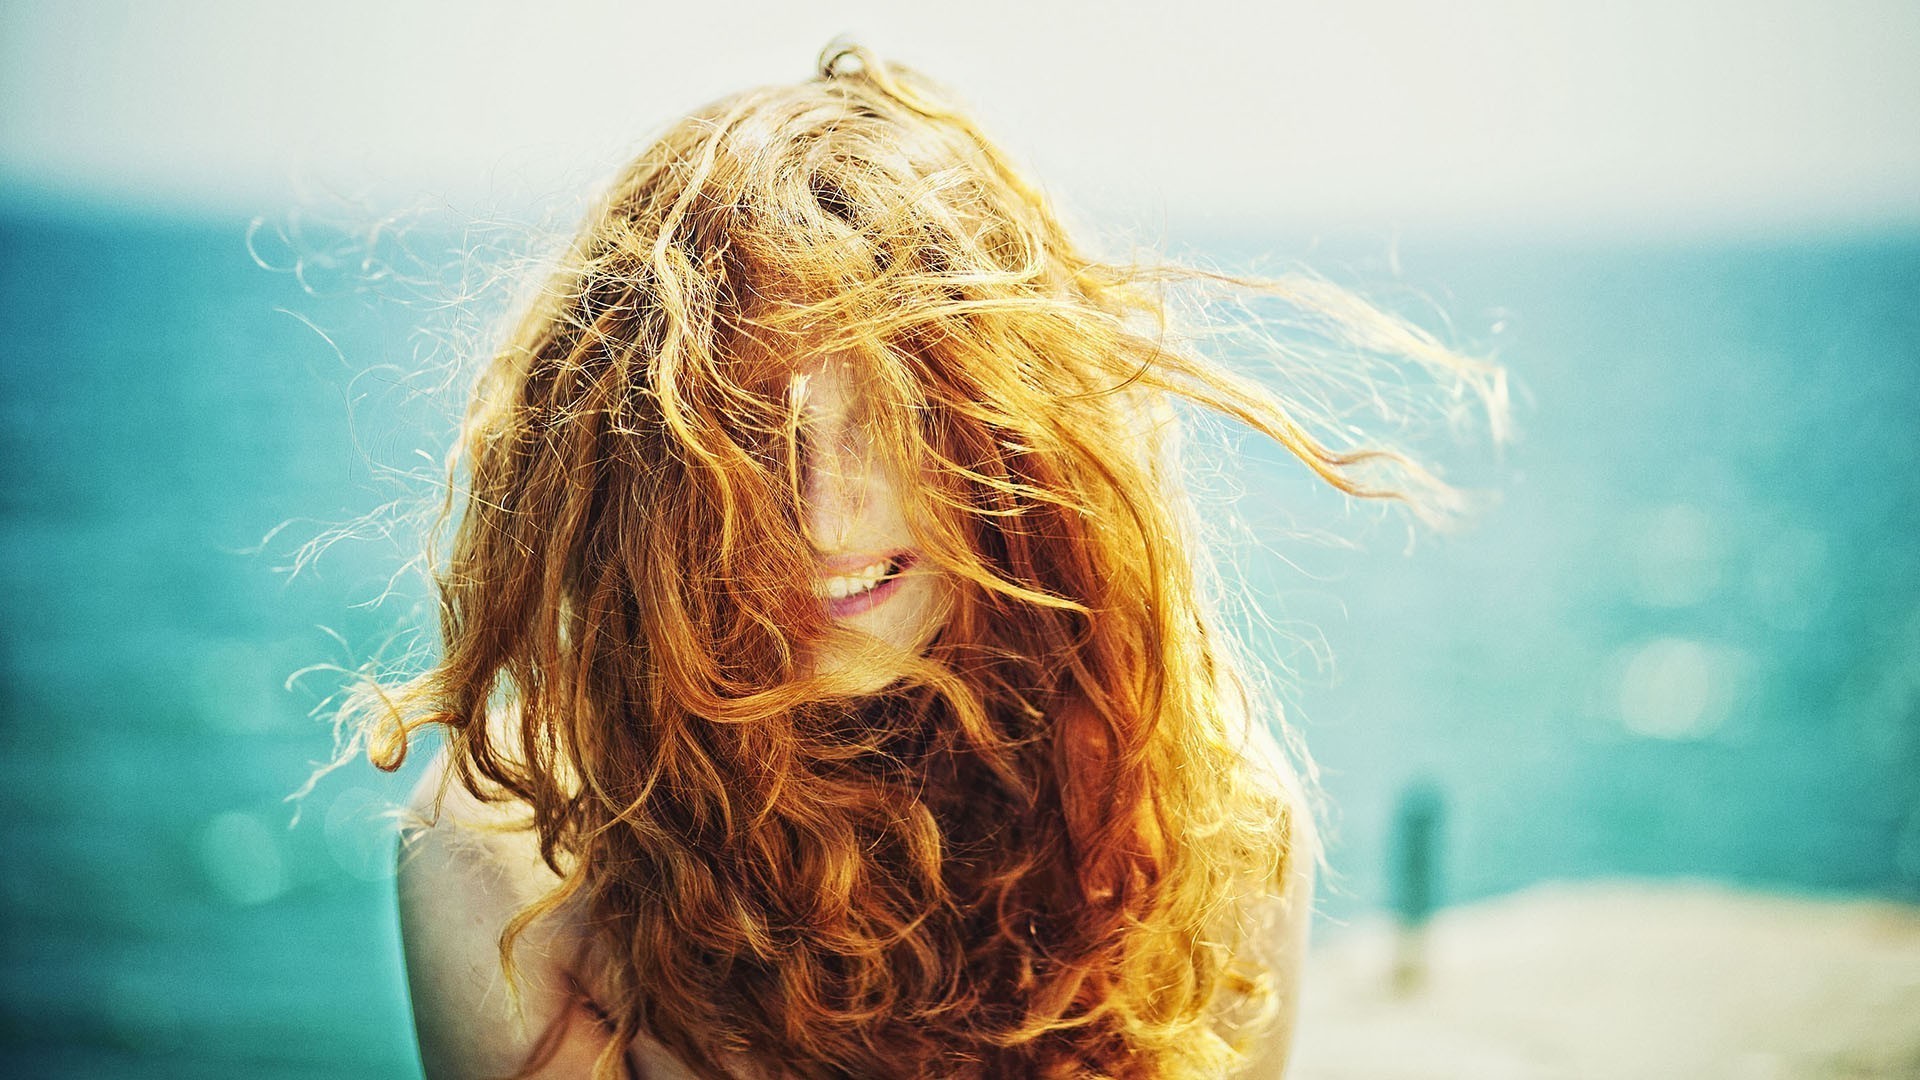 women, Redhead, Curly Hair, Hair In Face, Freckles, Face, Smiling, Windy Wallpaper